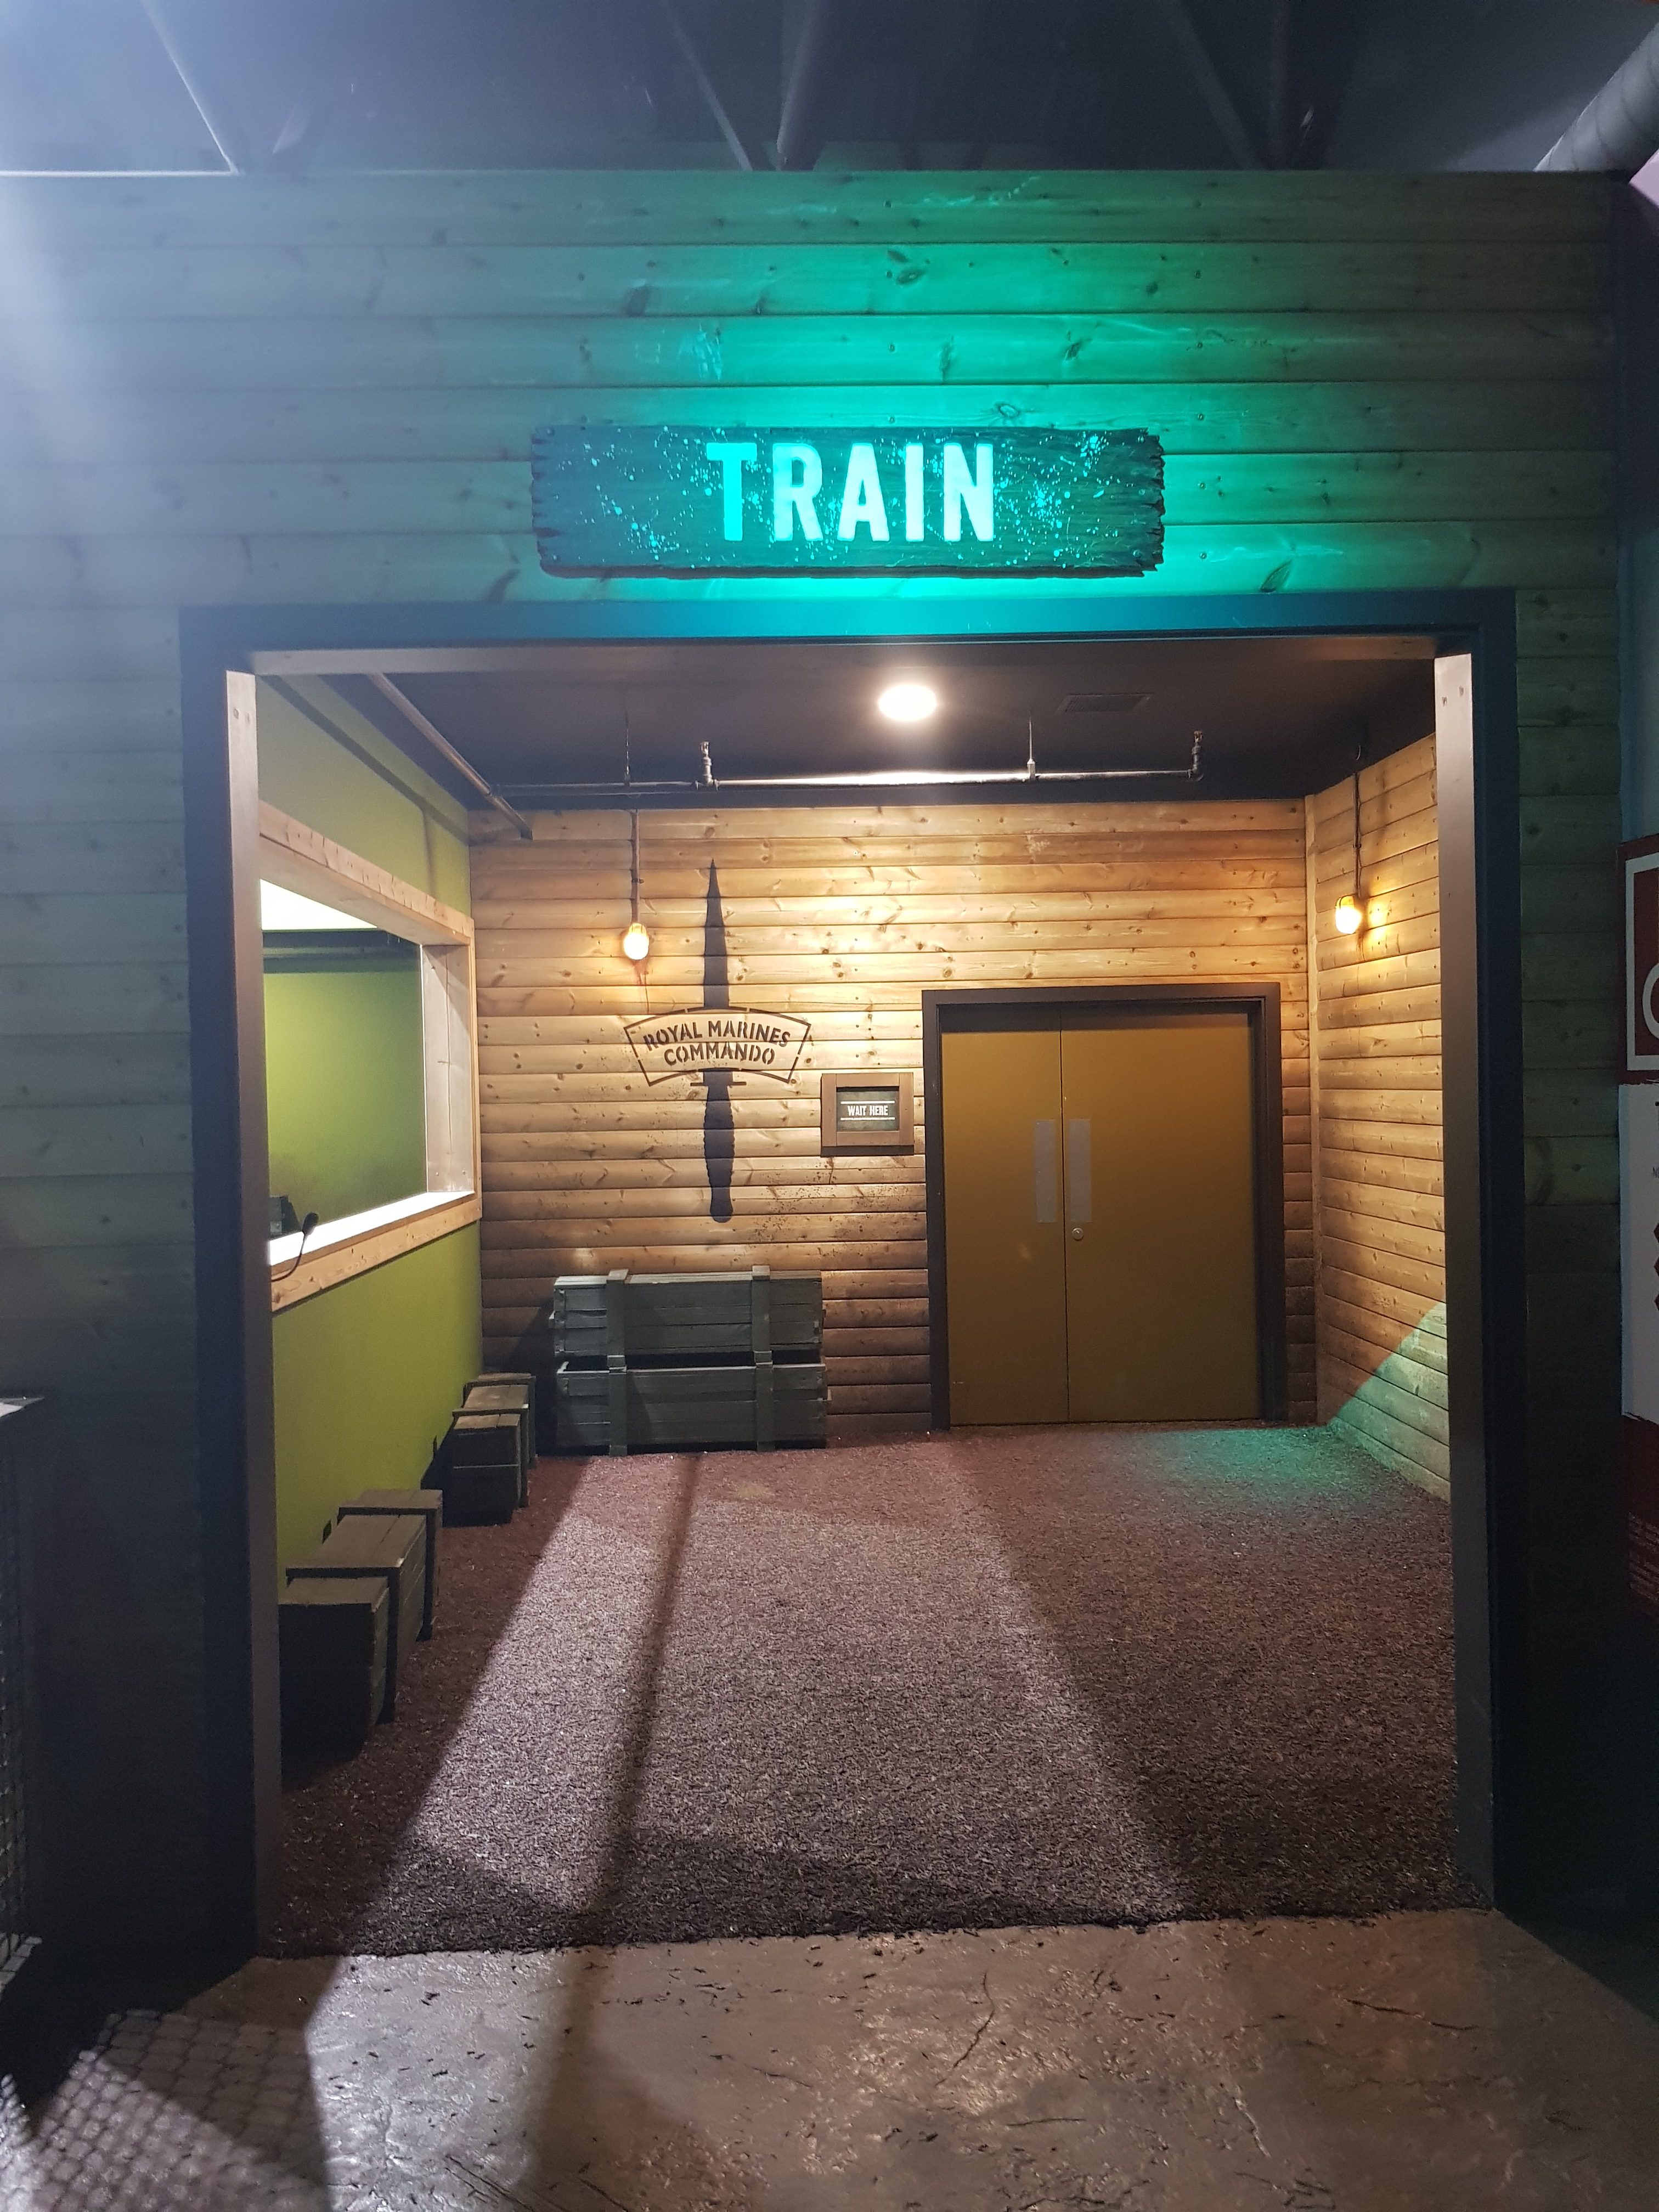 The entrance to the assault course at the Bear Grylls Adventure. A wooden door frame with TRAIN written above in white leading to a small room with a brown door and a Royal Marines Commando knife symbol.